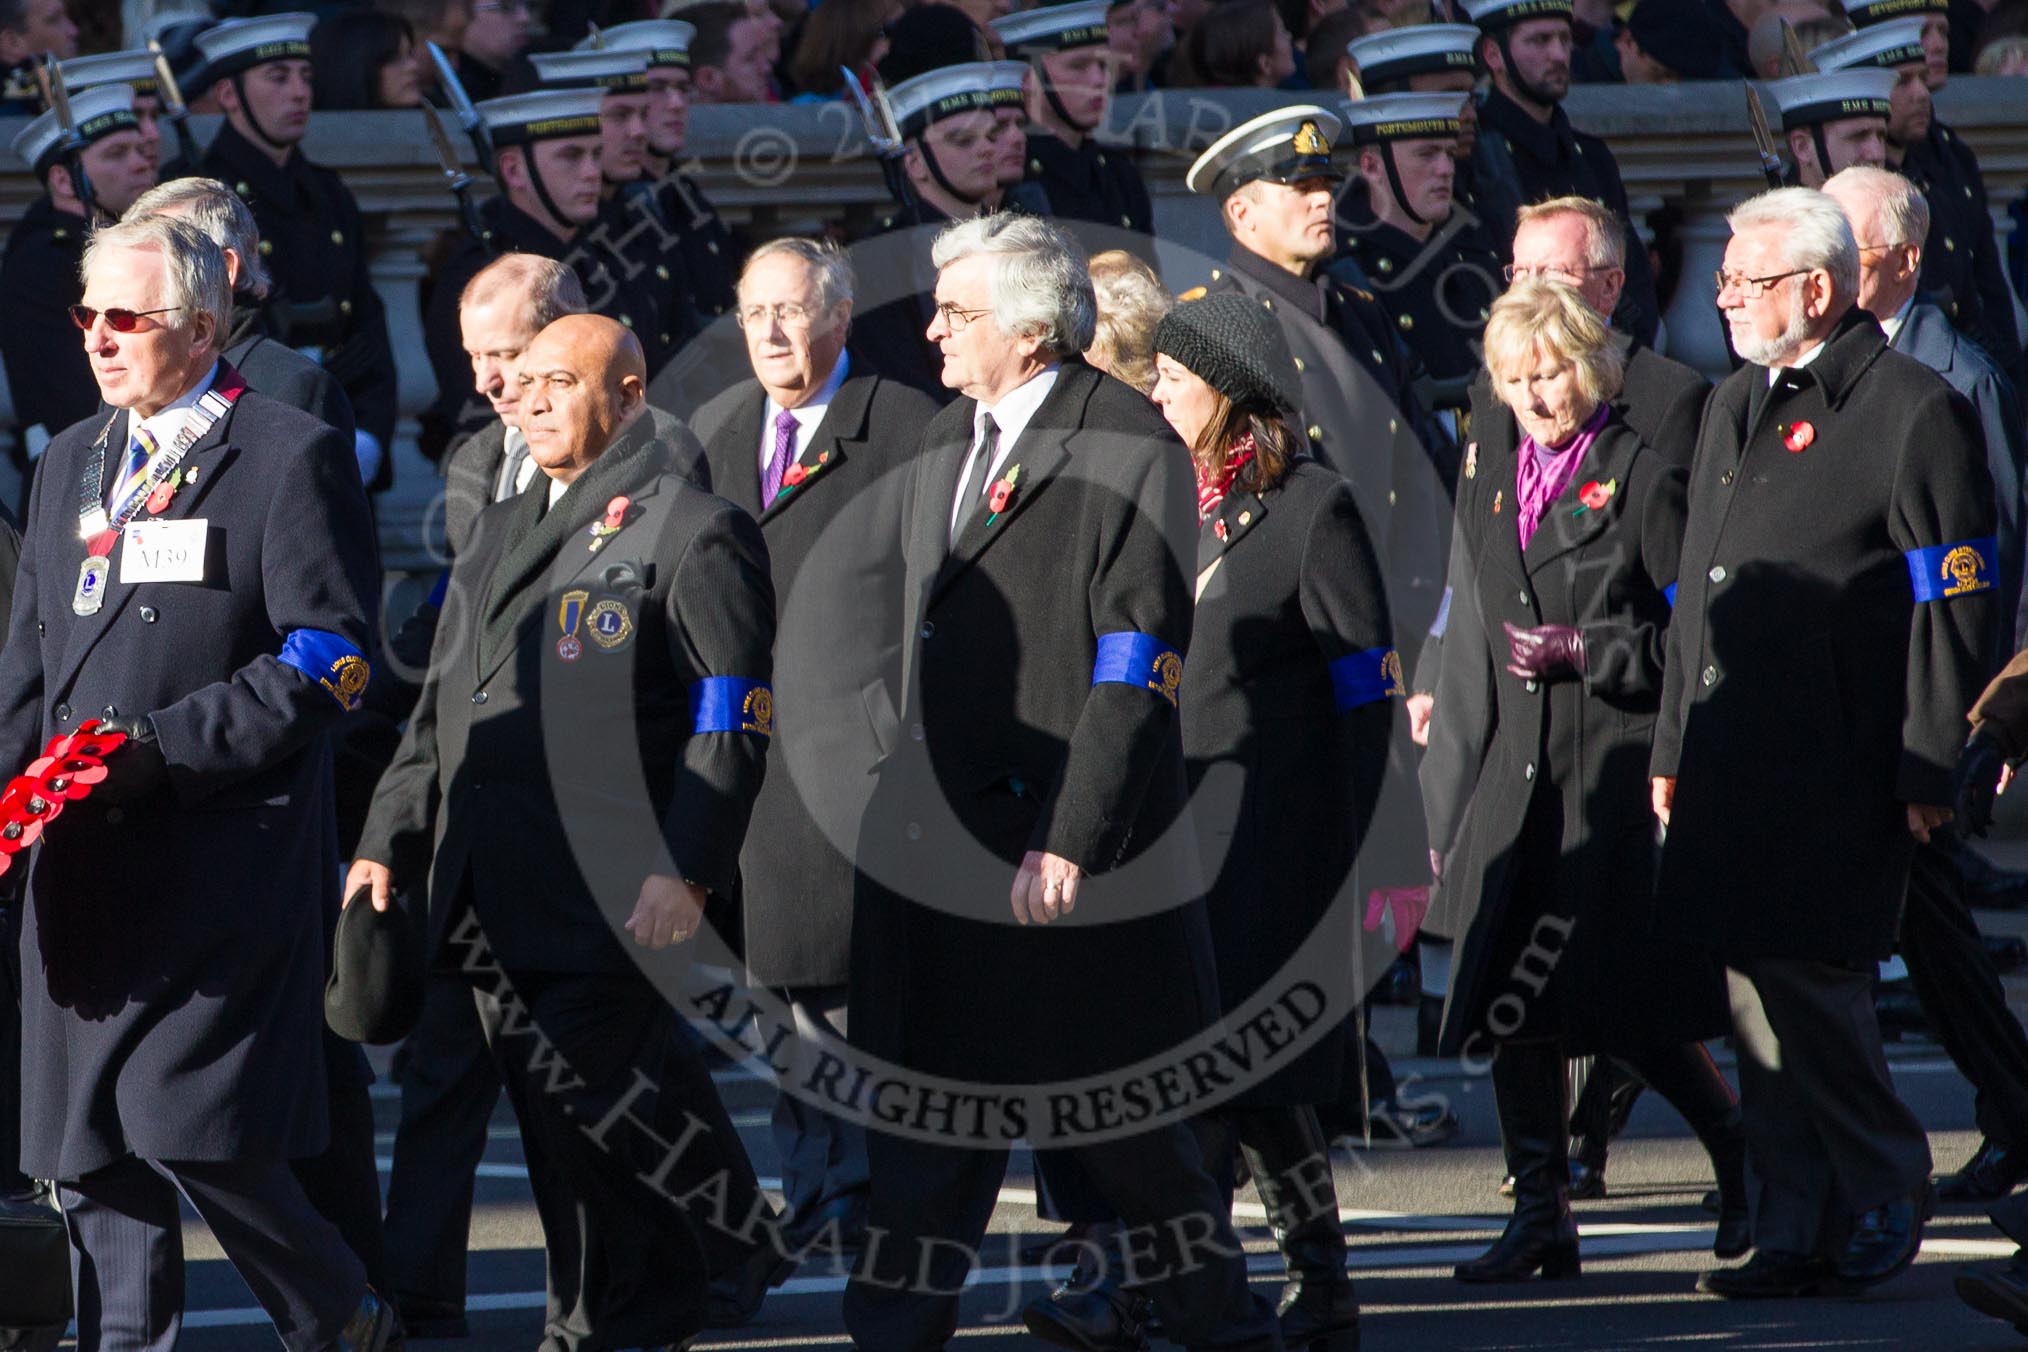 Remembrance Sunday 2012 Cenotaph March Past: Group M39 - Lions Club International..
Whitehall, Cenotaph,
London SW1,

United Kingdom,
on 11 November 2012 at 12:14, image #1655